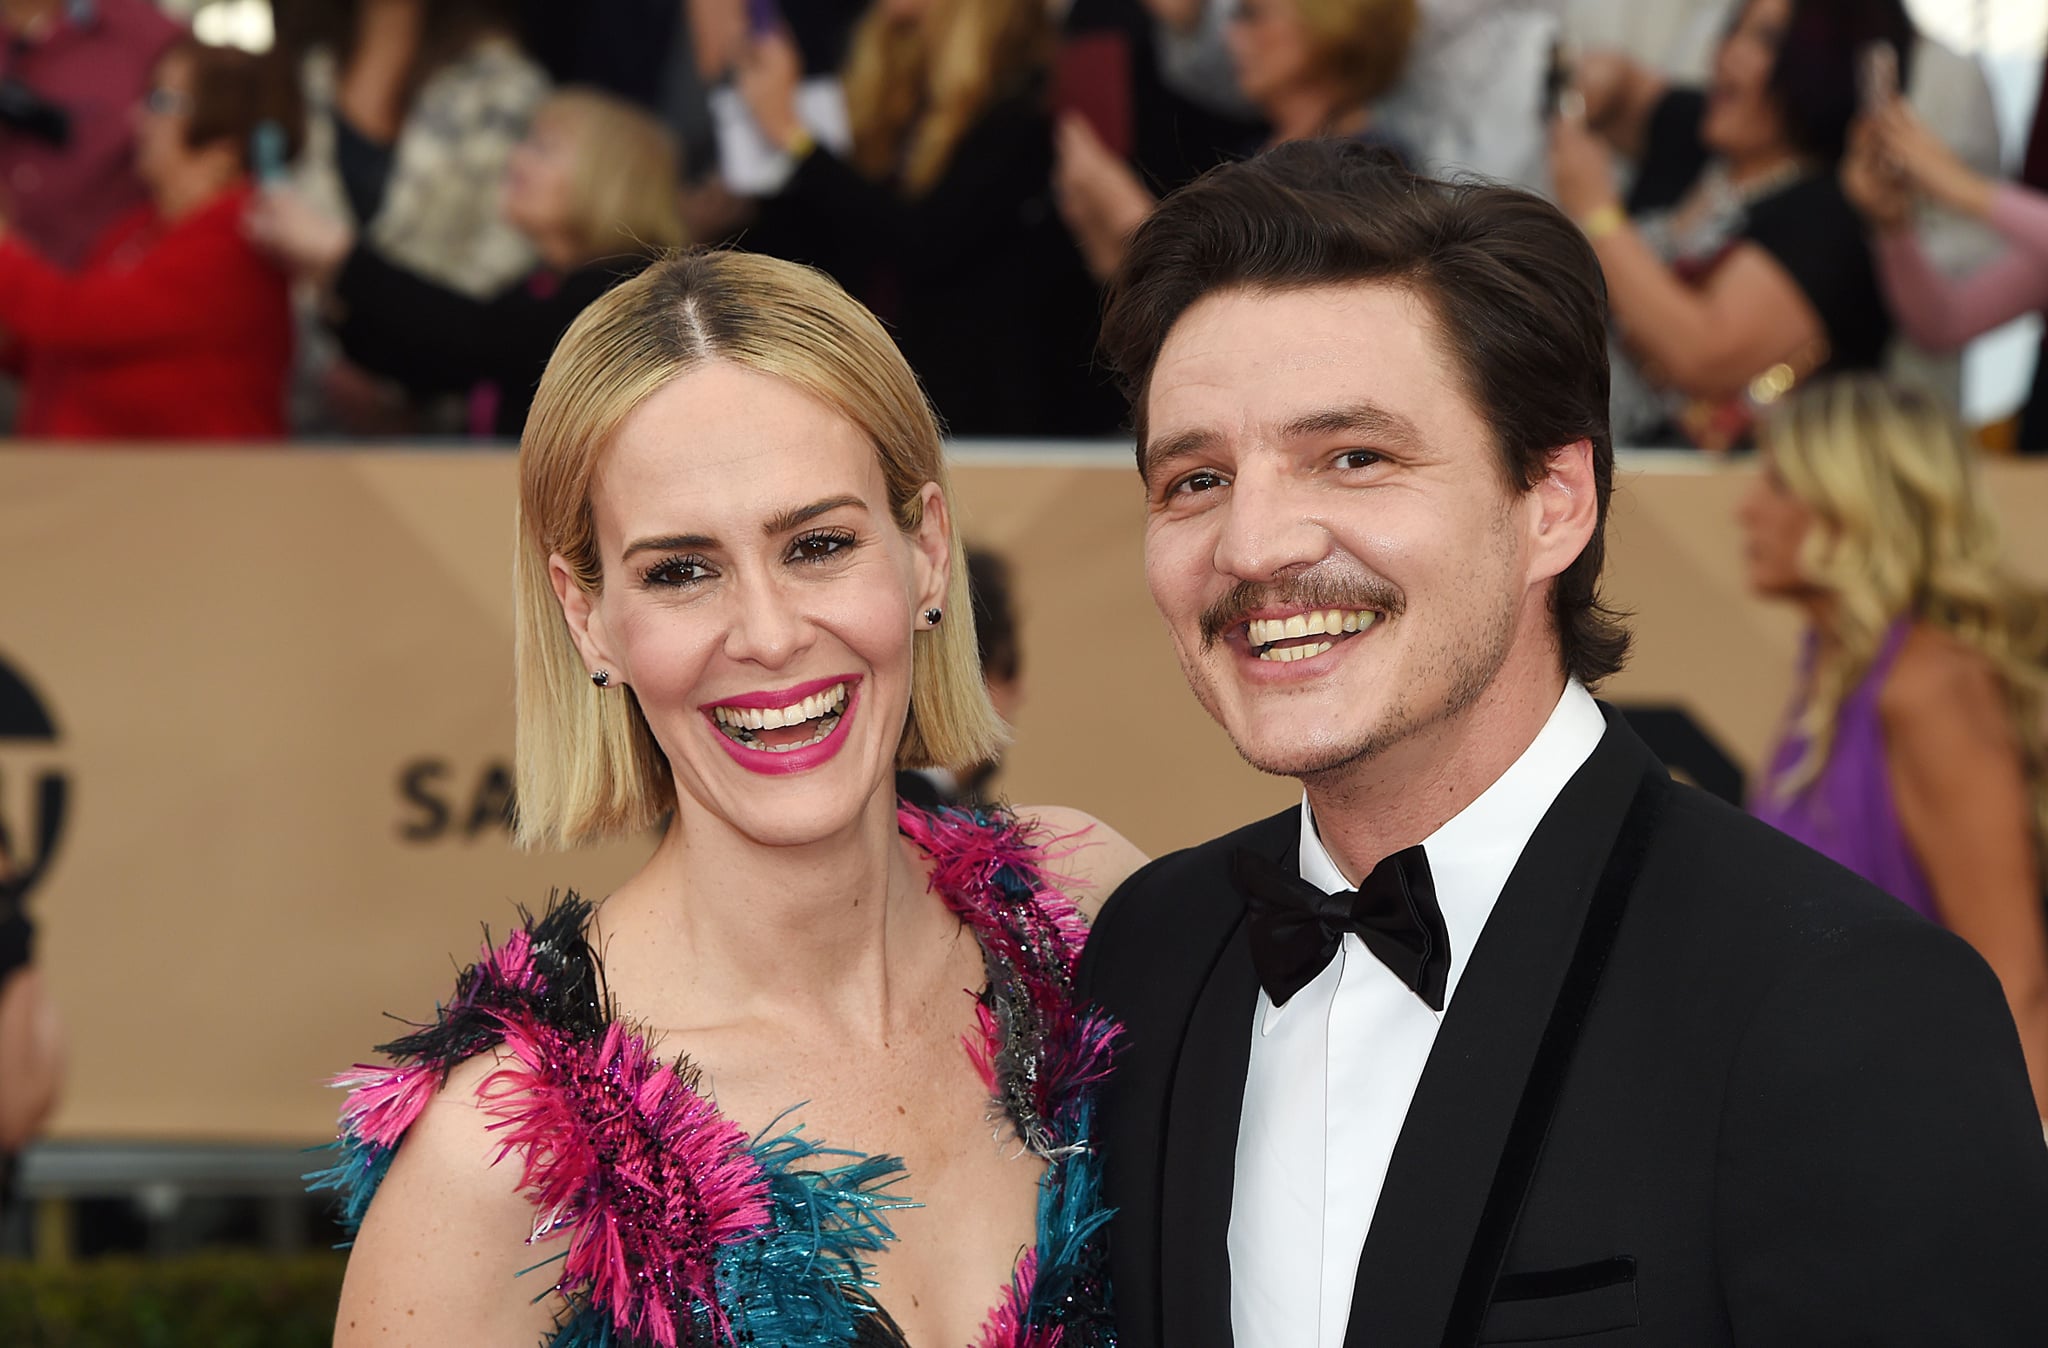 Actress Sarah Paulson and actor Pedro Pascal attend the 22nd Annual Screen Actors Guild Awards at The Shrine Auditorium on January 30, 2016 in Los Angeles, California.  AFP PHOTO / Mark Ralston / AFP / Mark Ralston (photo credit should read Mark Ralston / AFP via Getty Images)